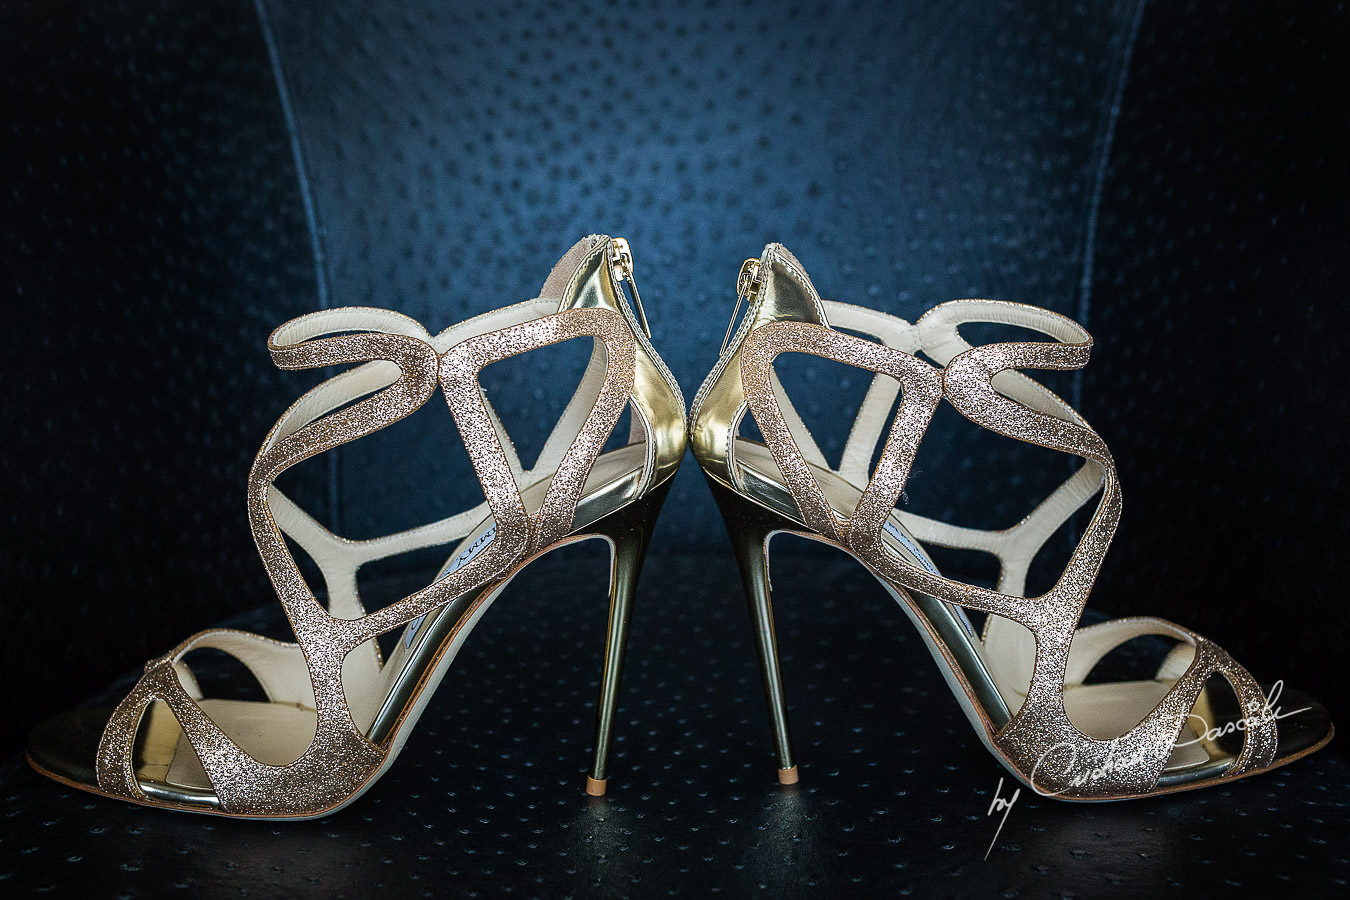 Jimmy Choo bridal shoes details, captured at a wedding in Cyprus by Photographer Cristian Dascalu.